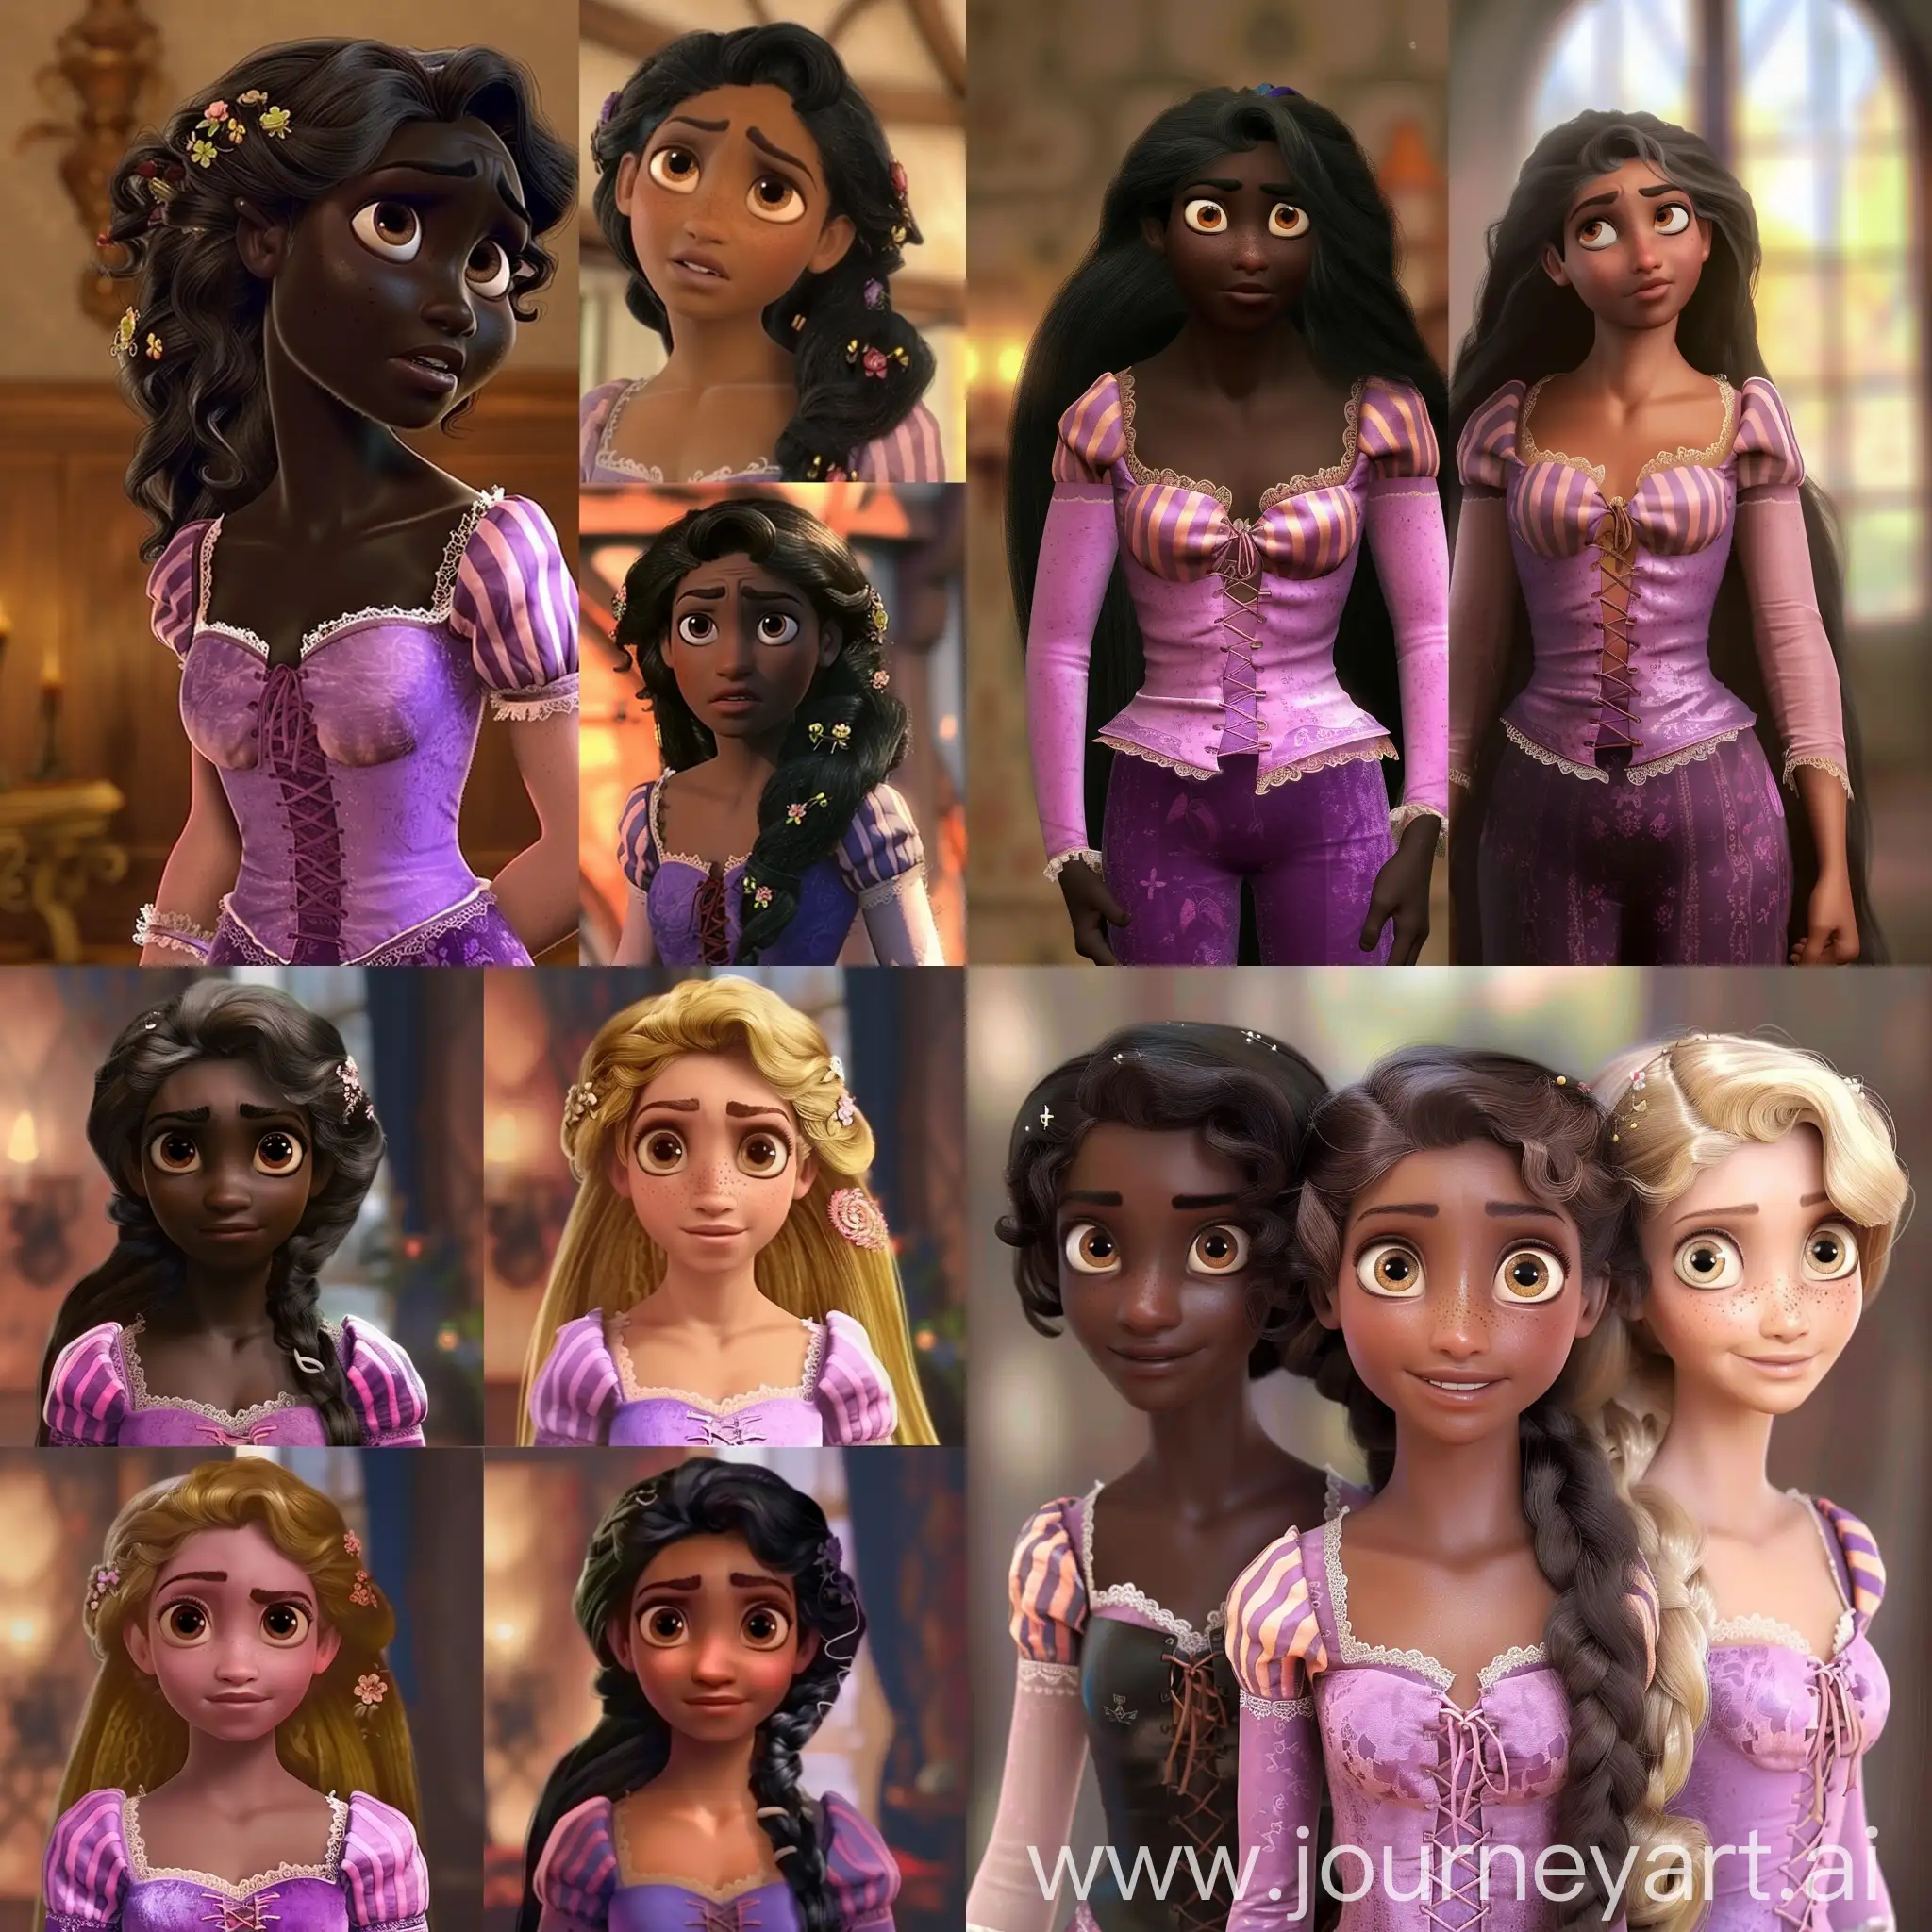 show rapunzel with black skin color, fat and bad hair
with medium hair
